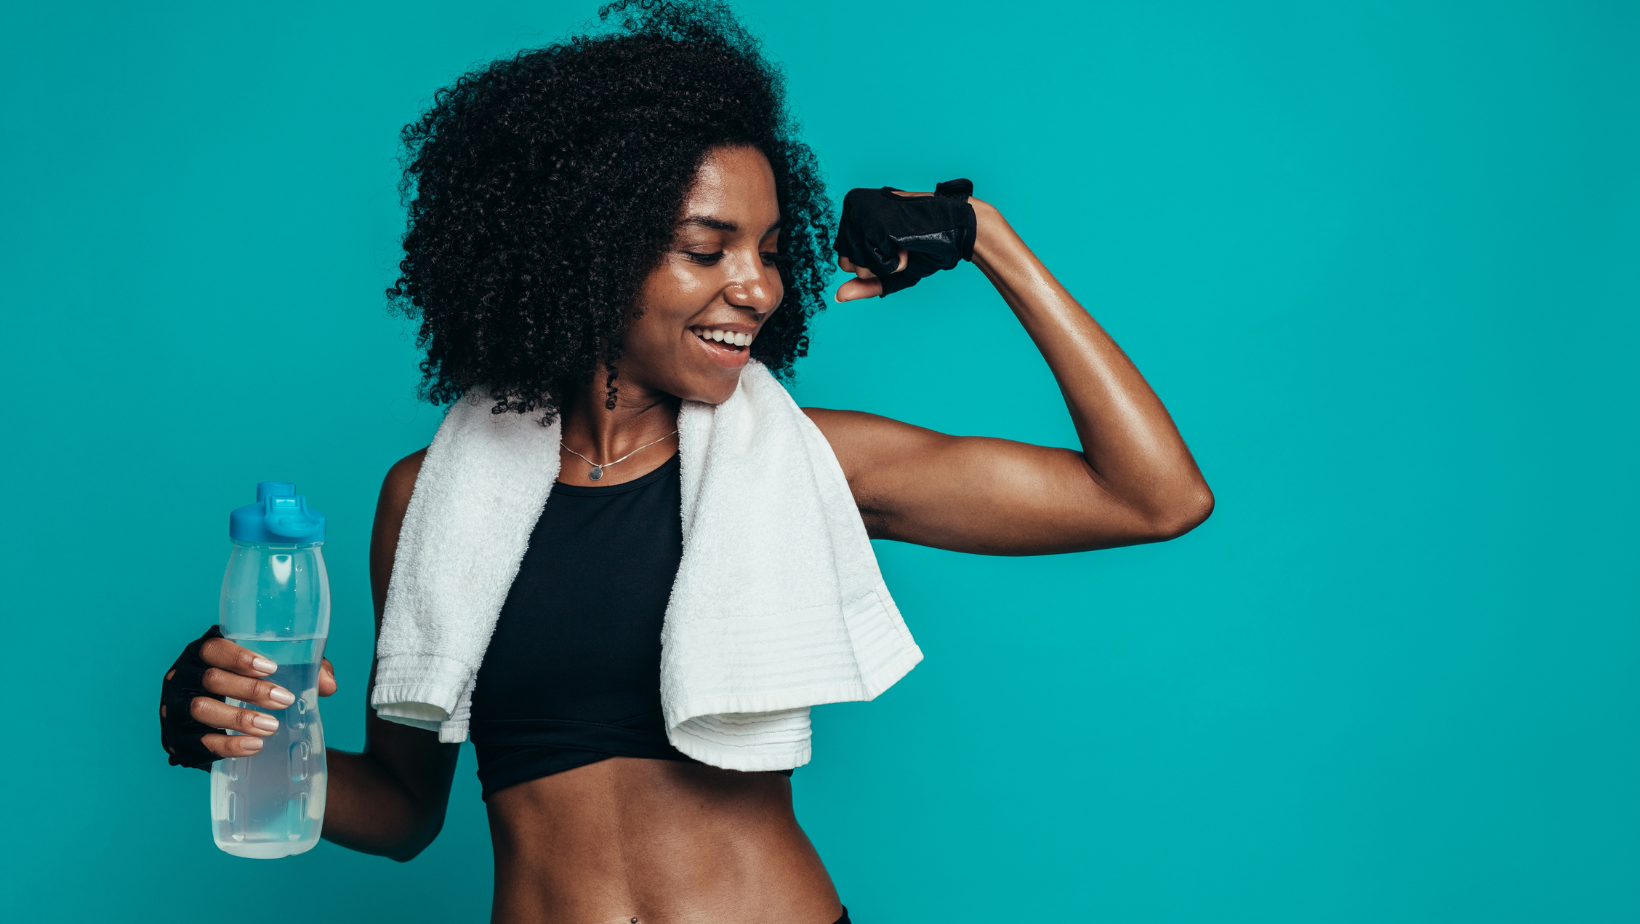 Athletic Black woman with a bottle of water making a muscle